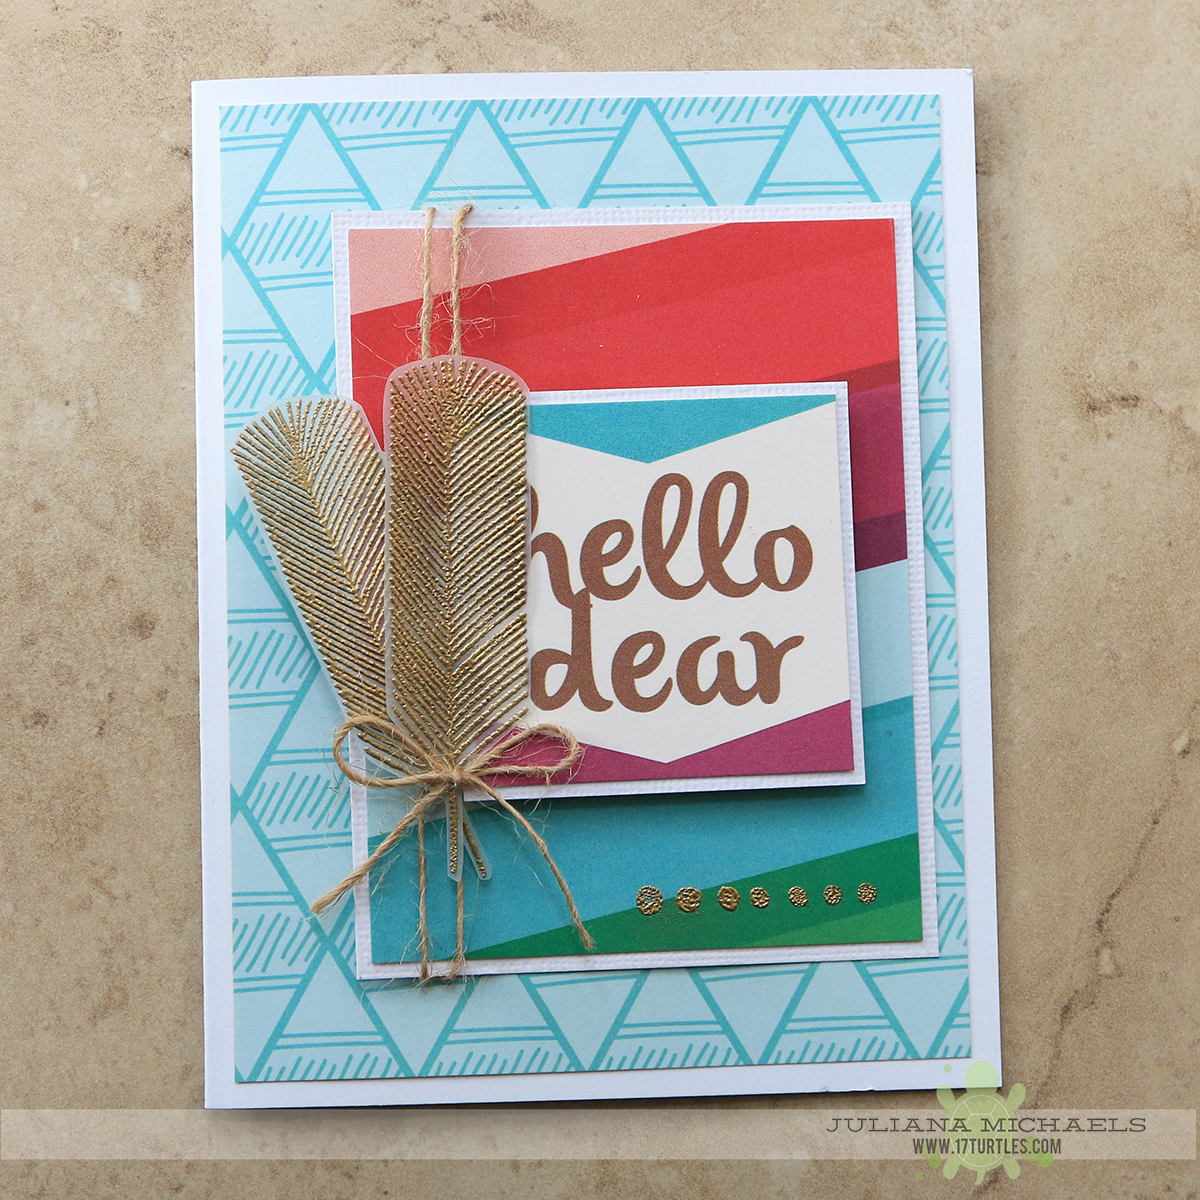 Hello Dear Card by Juliana Michaels for Elle's Studio featuring Sycamore Lane and October Exclusive Kit